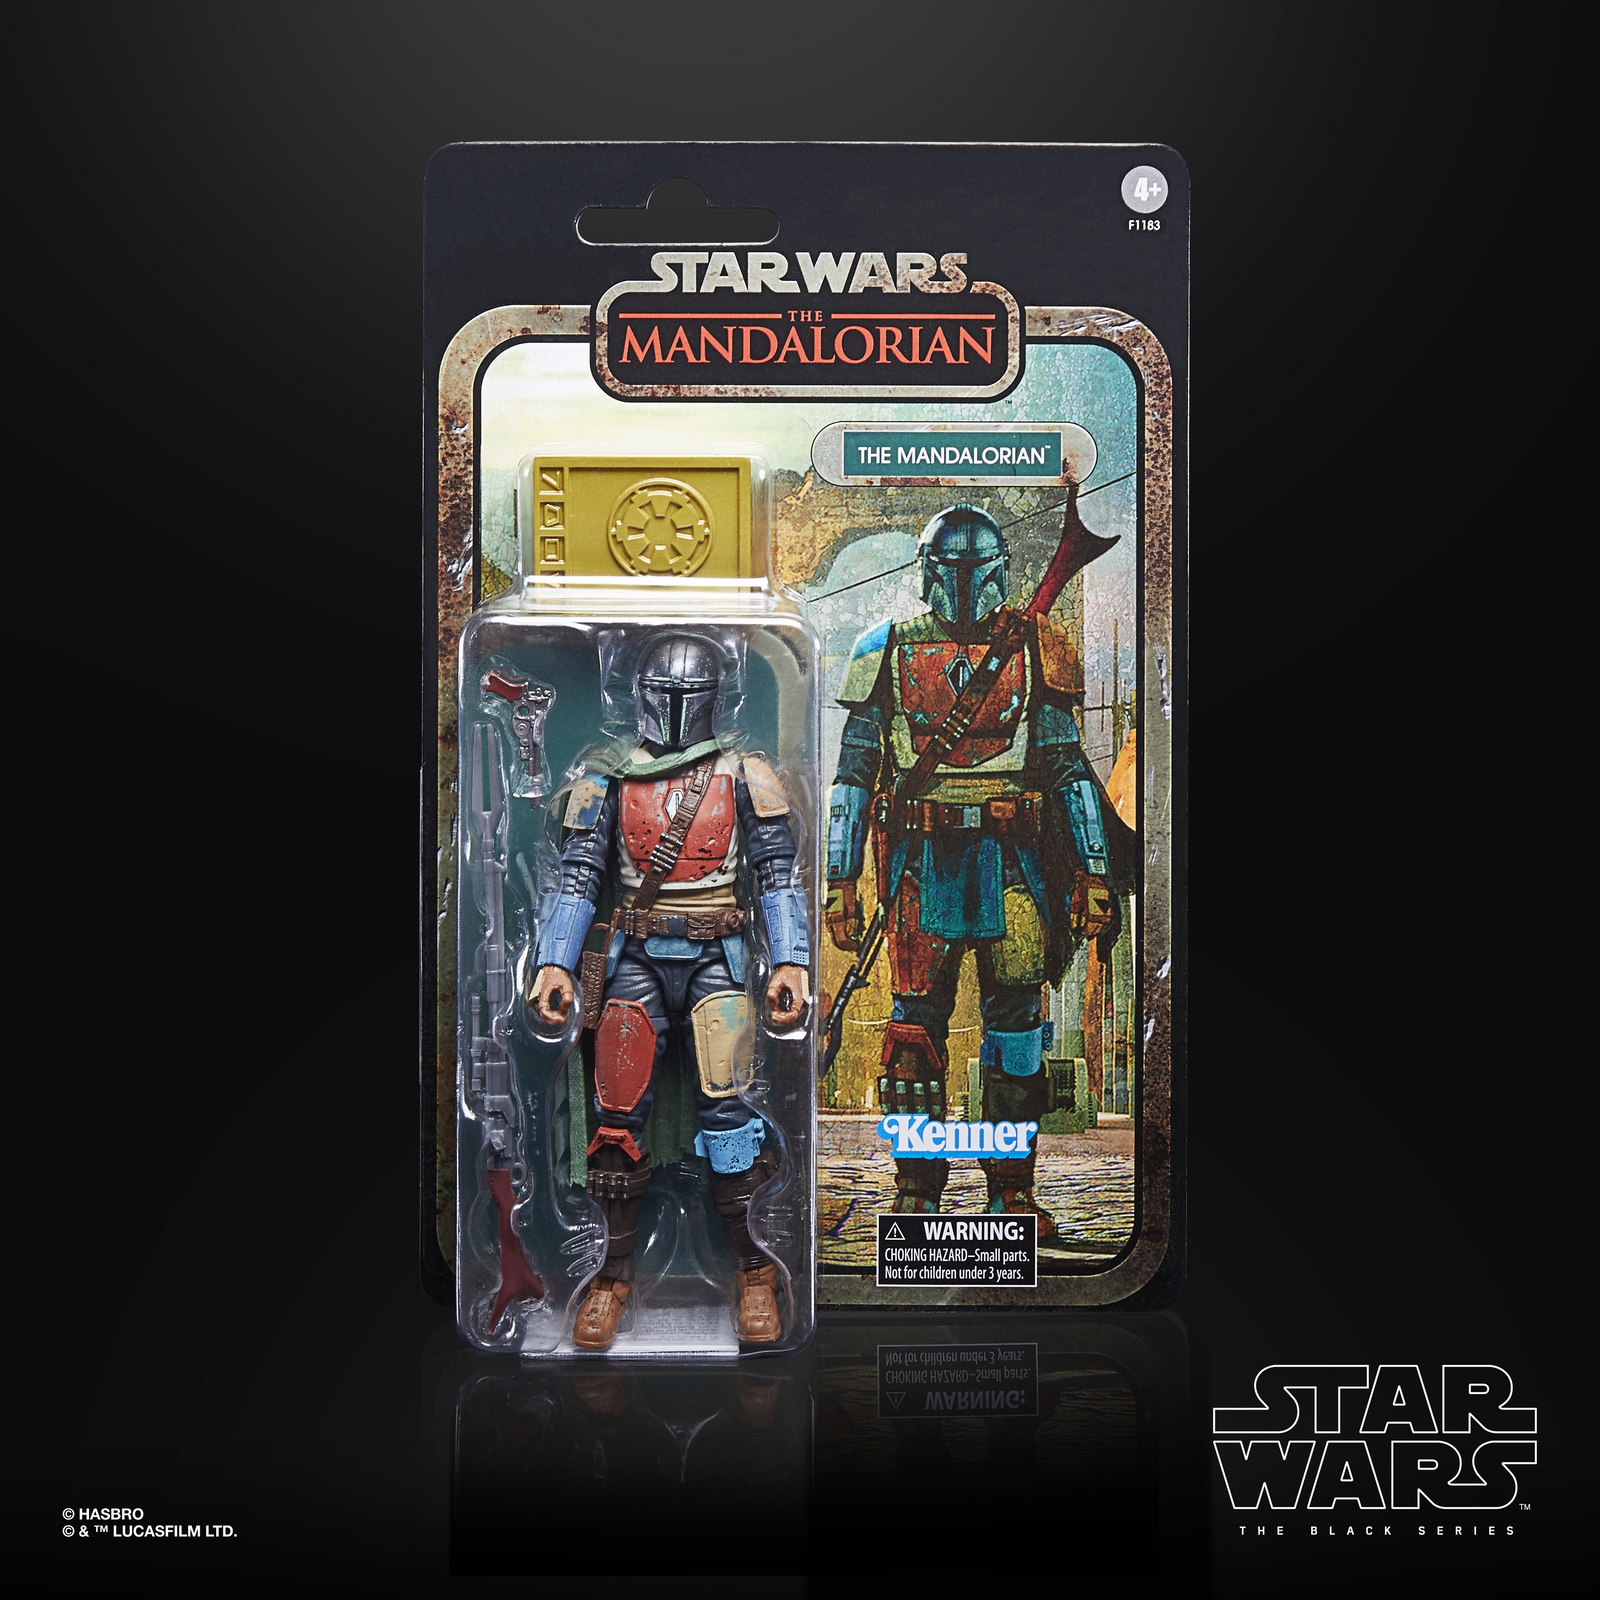 STAR WARS THE BLACK SERIES CREDIT COLLECTION 6-INCH THE MANDALORIAN Figure - inpck.jpg